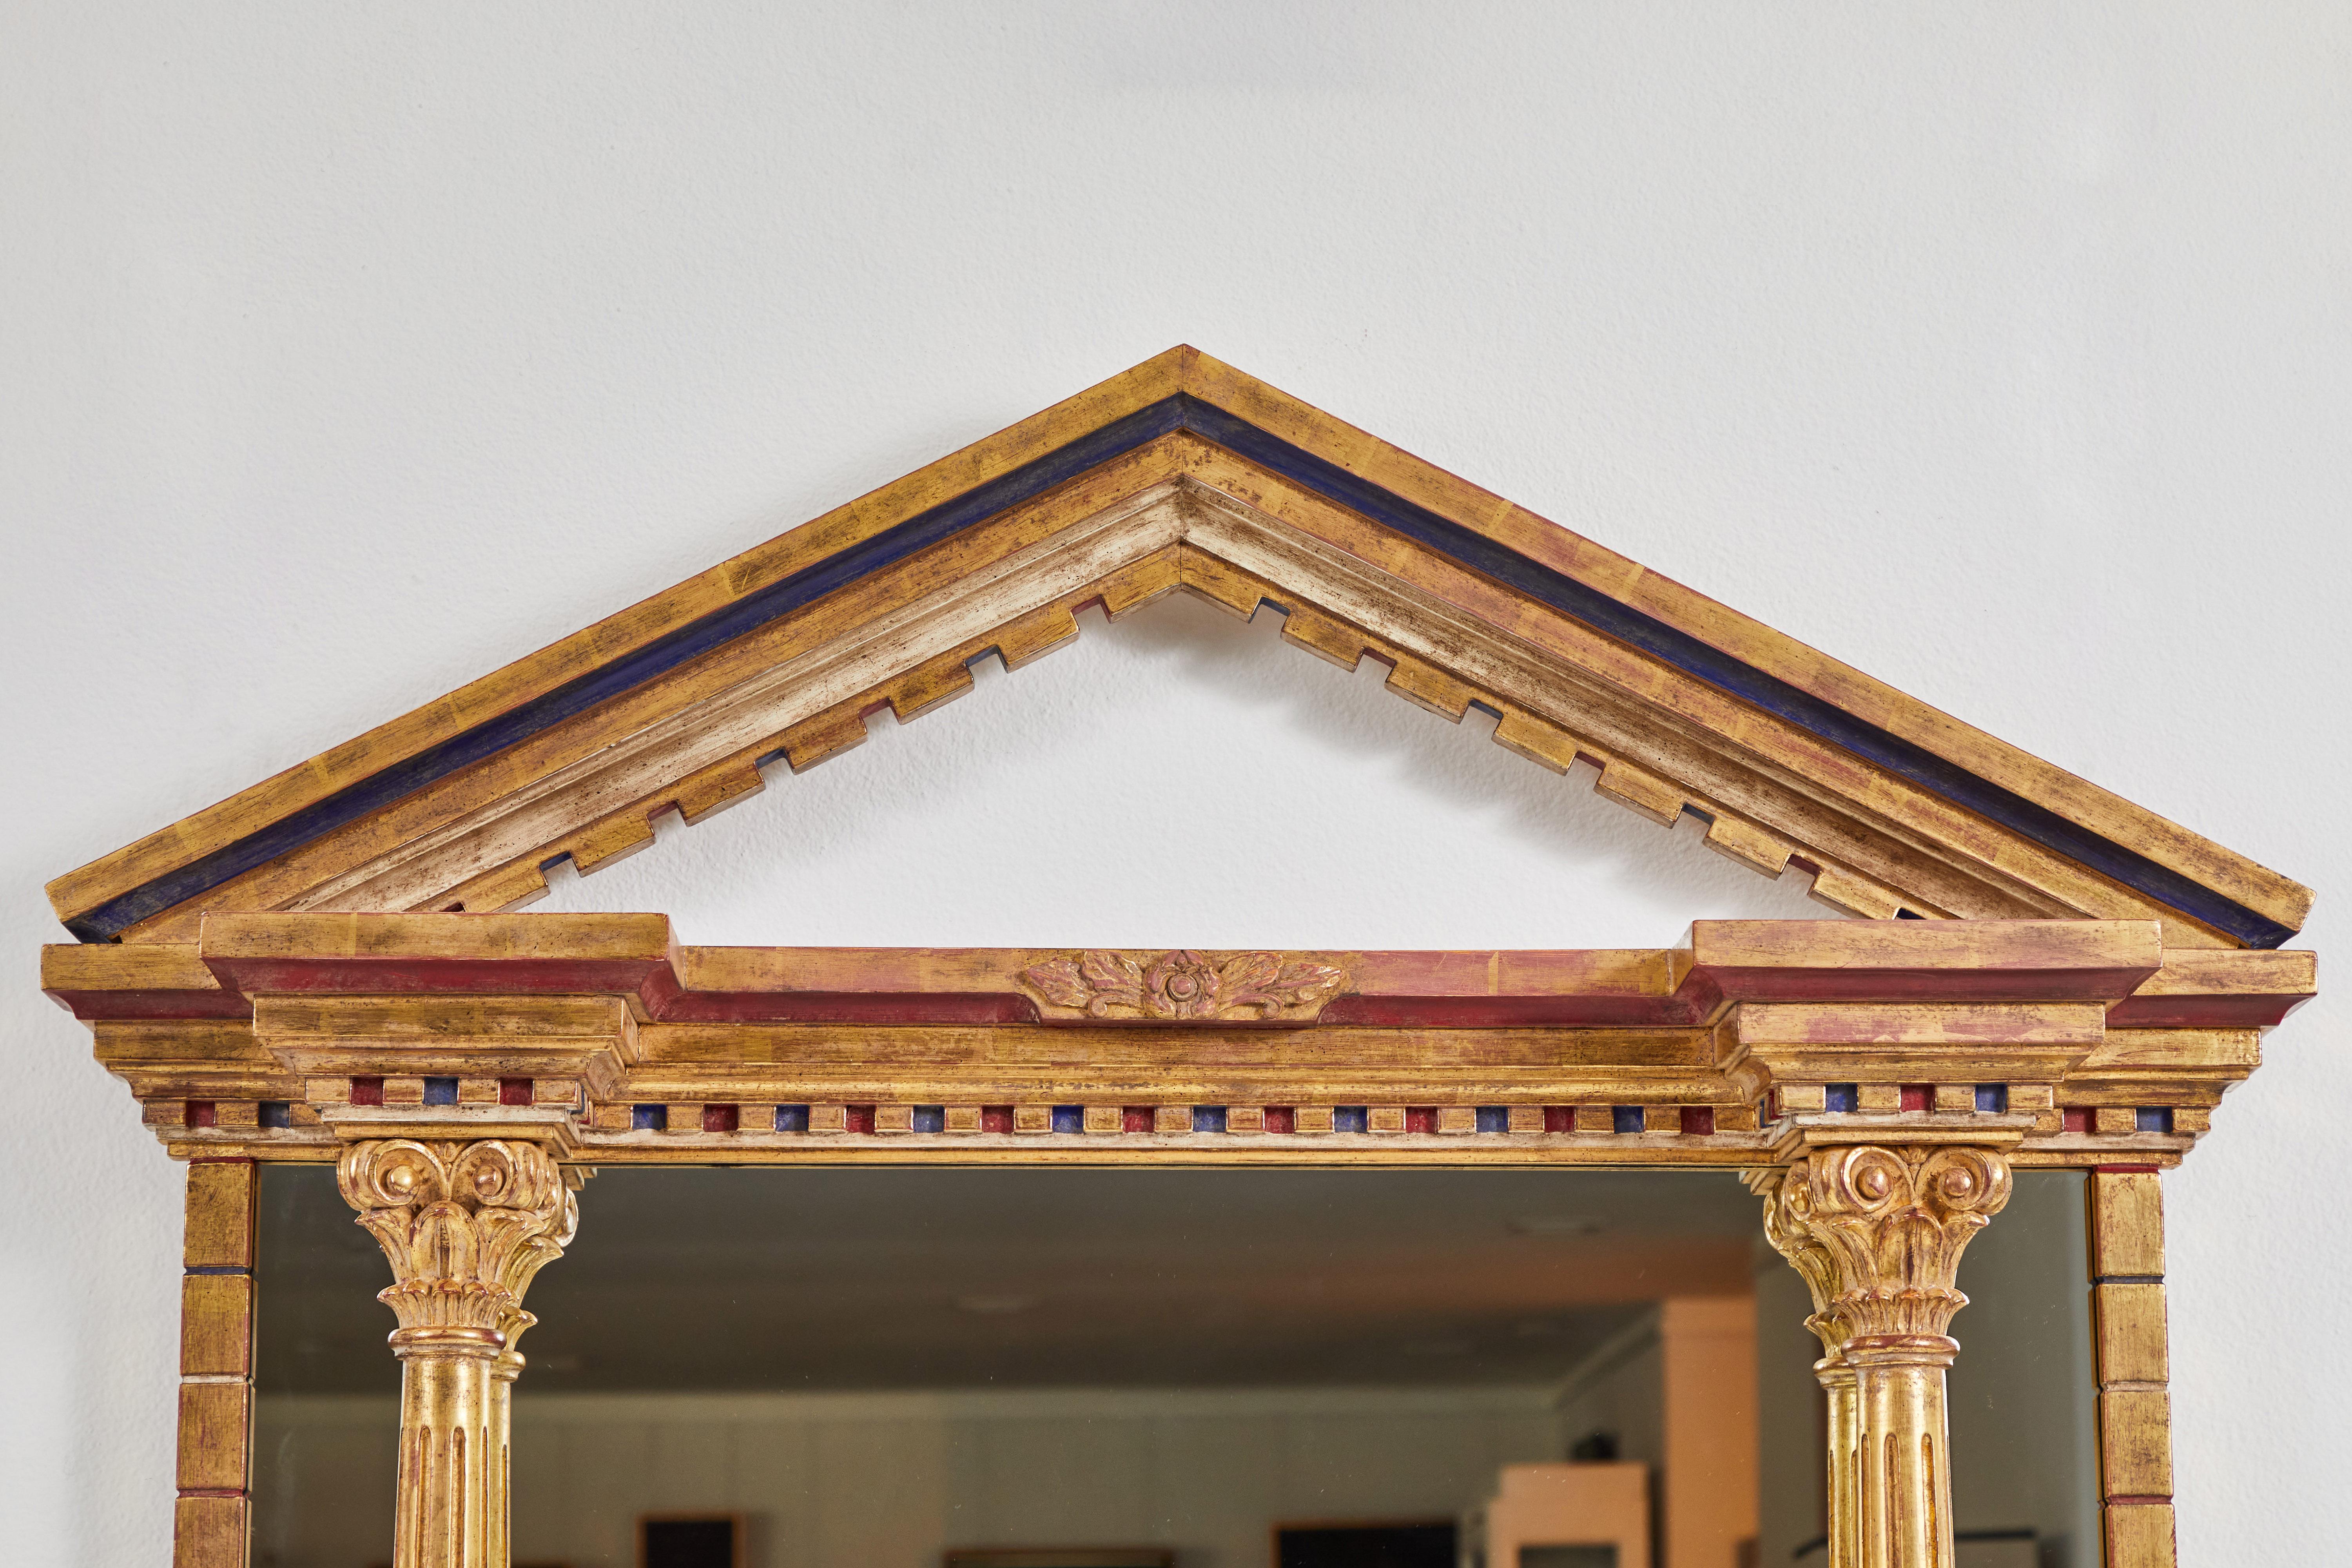 This grand gold leaf polychromed mirror boasts a decorated pediment reaching 63 inches high. Its carved indentations have been hand painted red and blue. The two columns on either side finish with a lotus. The mirror itself measures 39